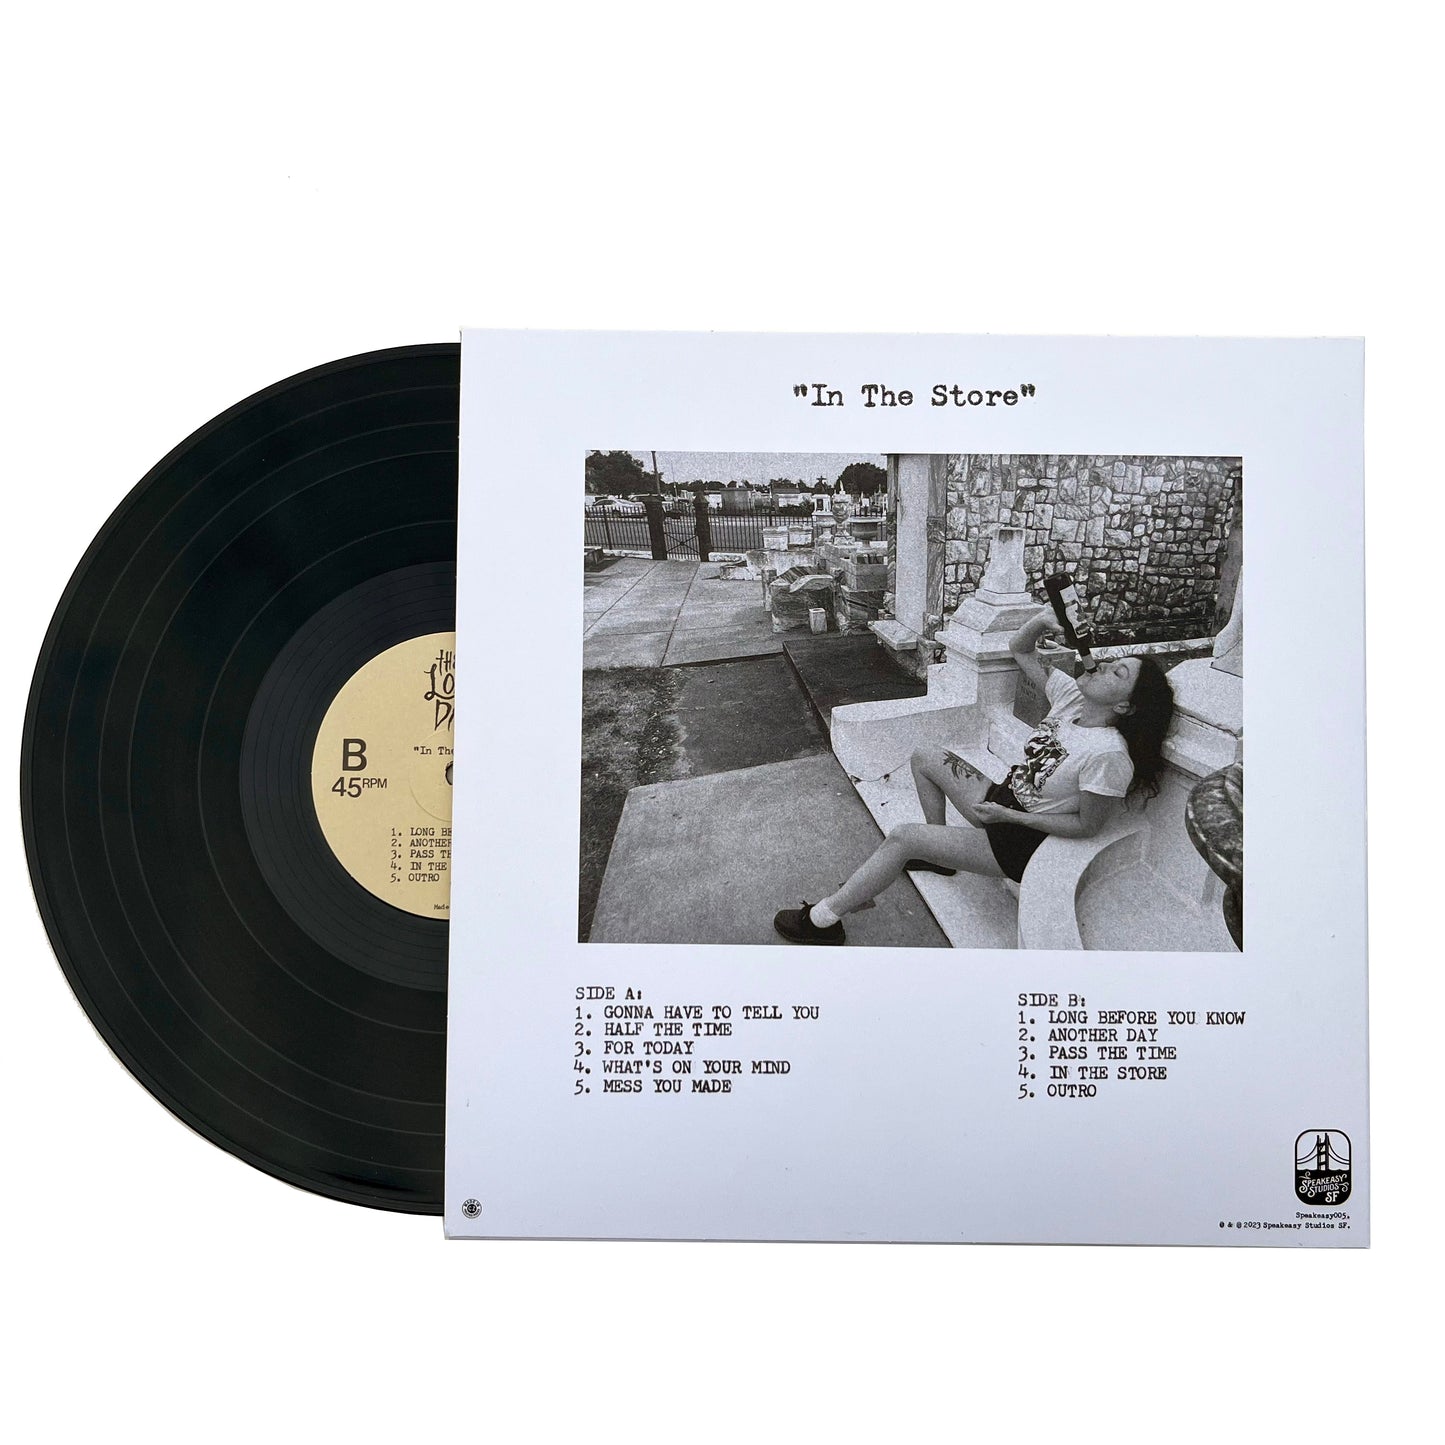 Speakeasy 005 - "In The Store" by The Lost Days - Limited Edition Vinyl